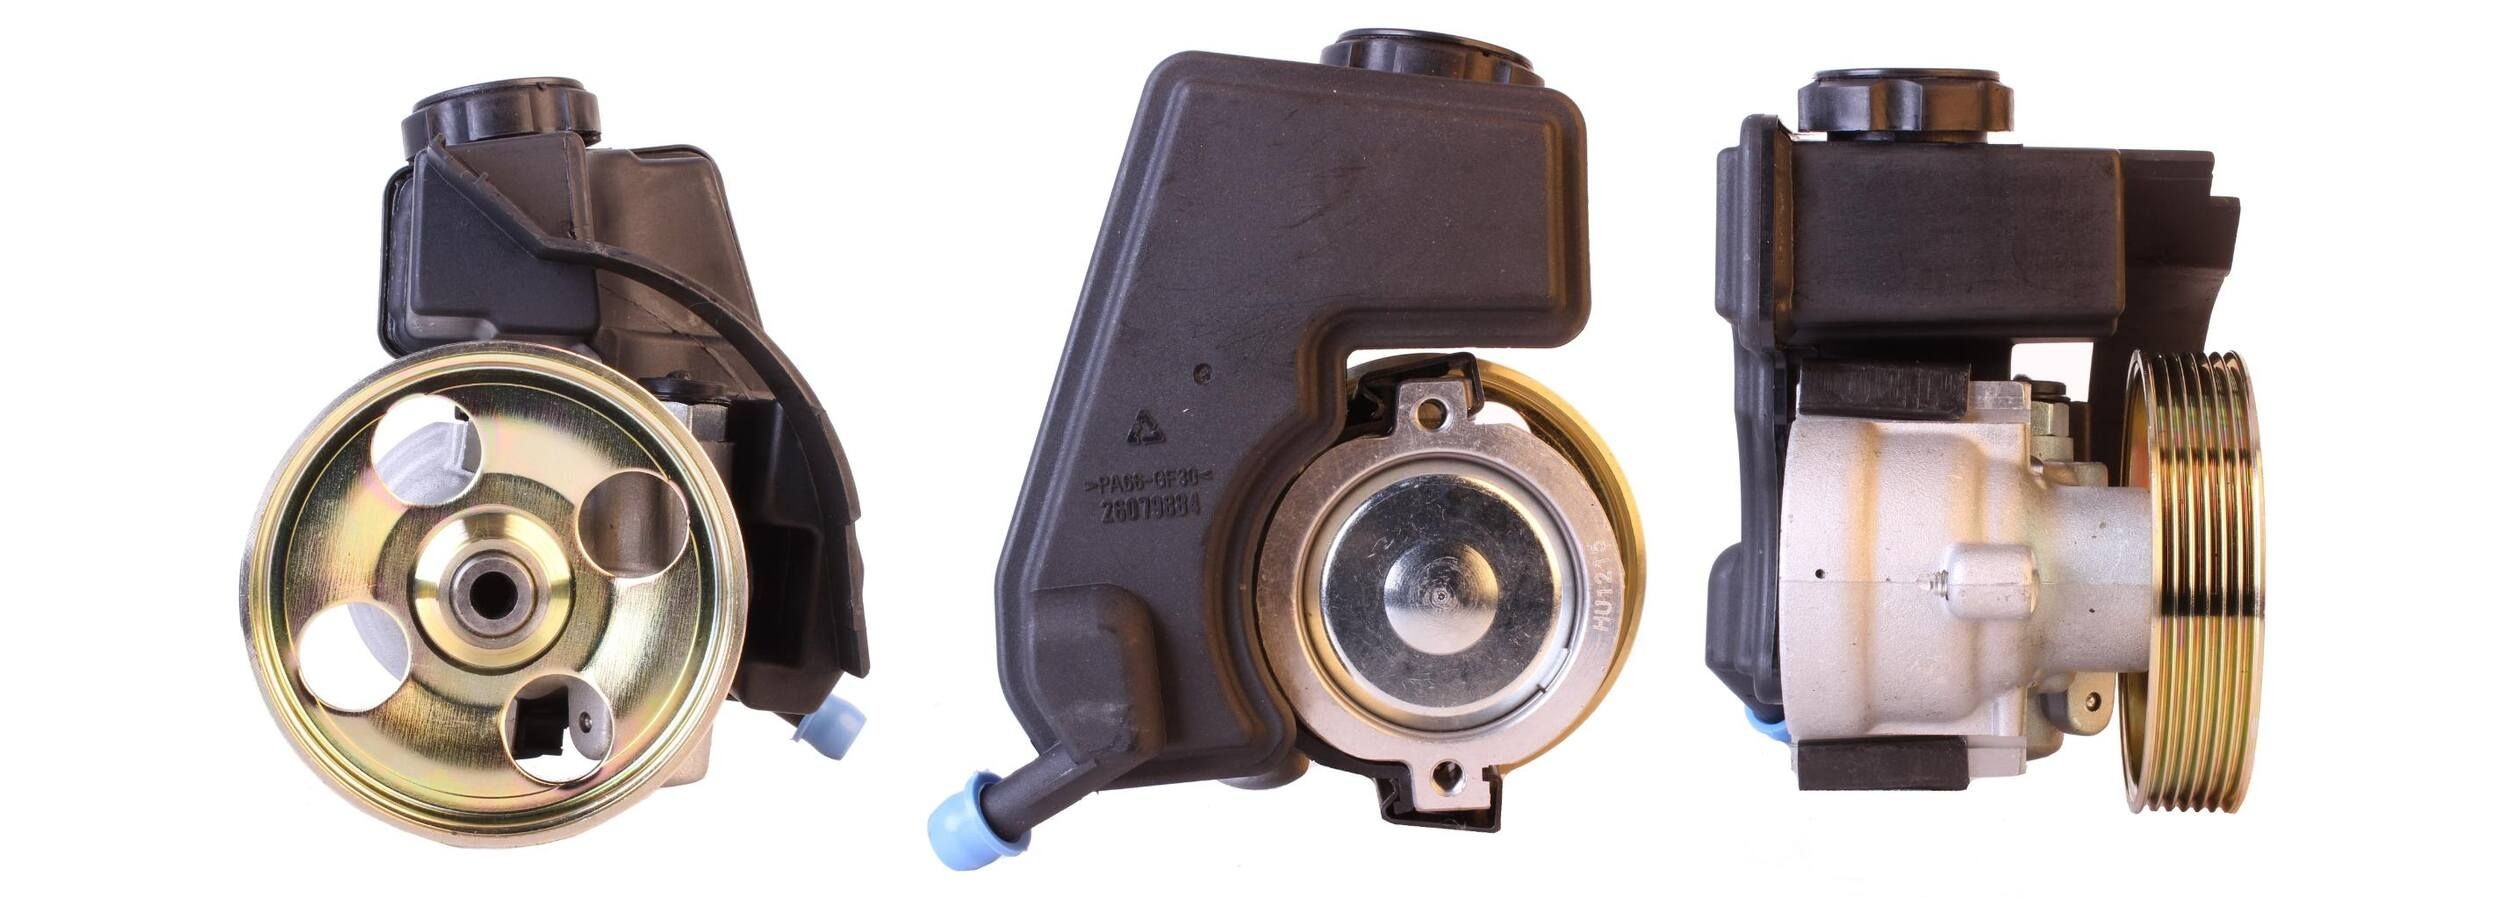 ELSTOCK 15-0231 Power steering pump Hydraulic, 100 bar, Number of grooves: 6, Belt Pulley Ø: 114 mm, with reservoir